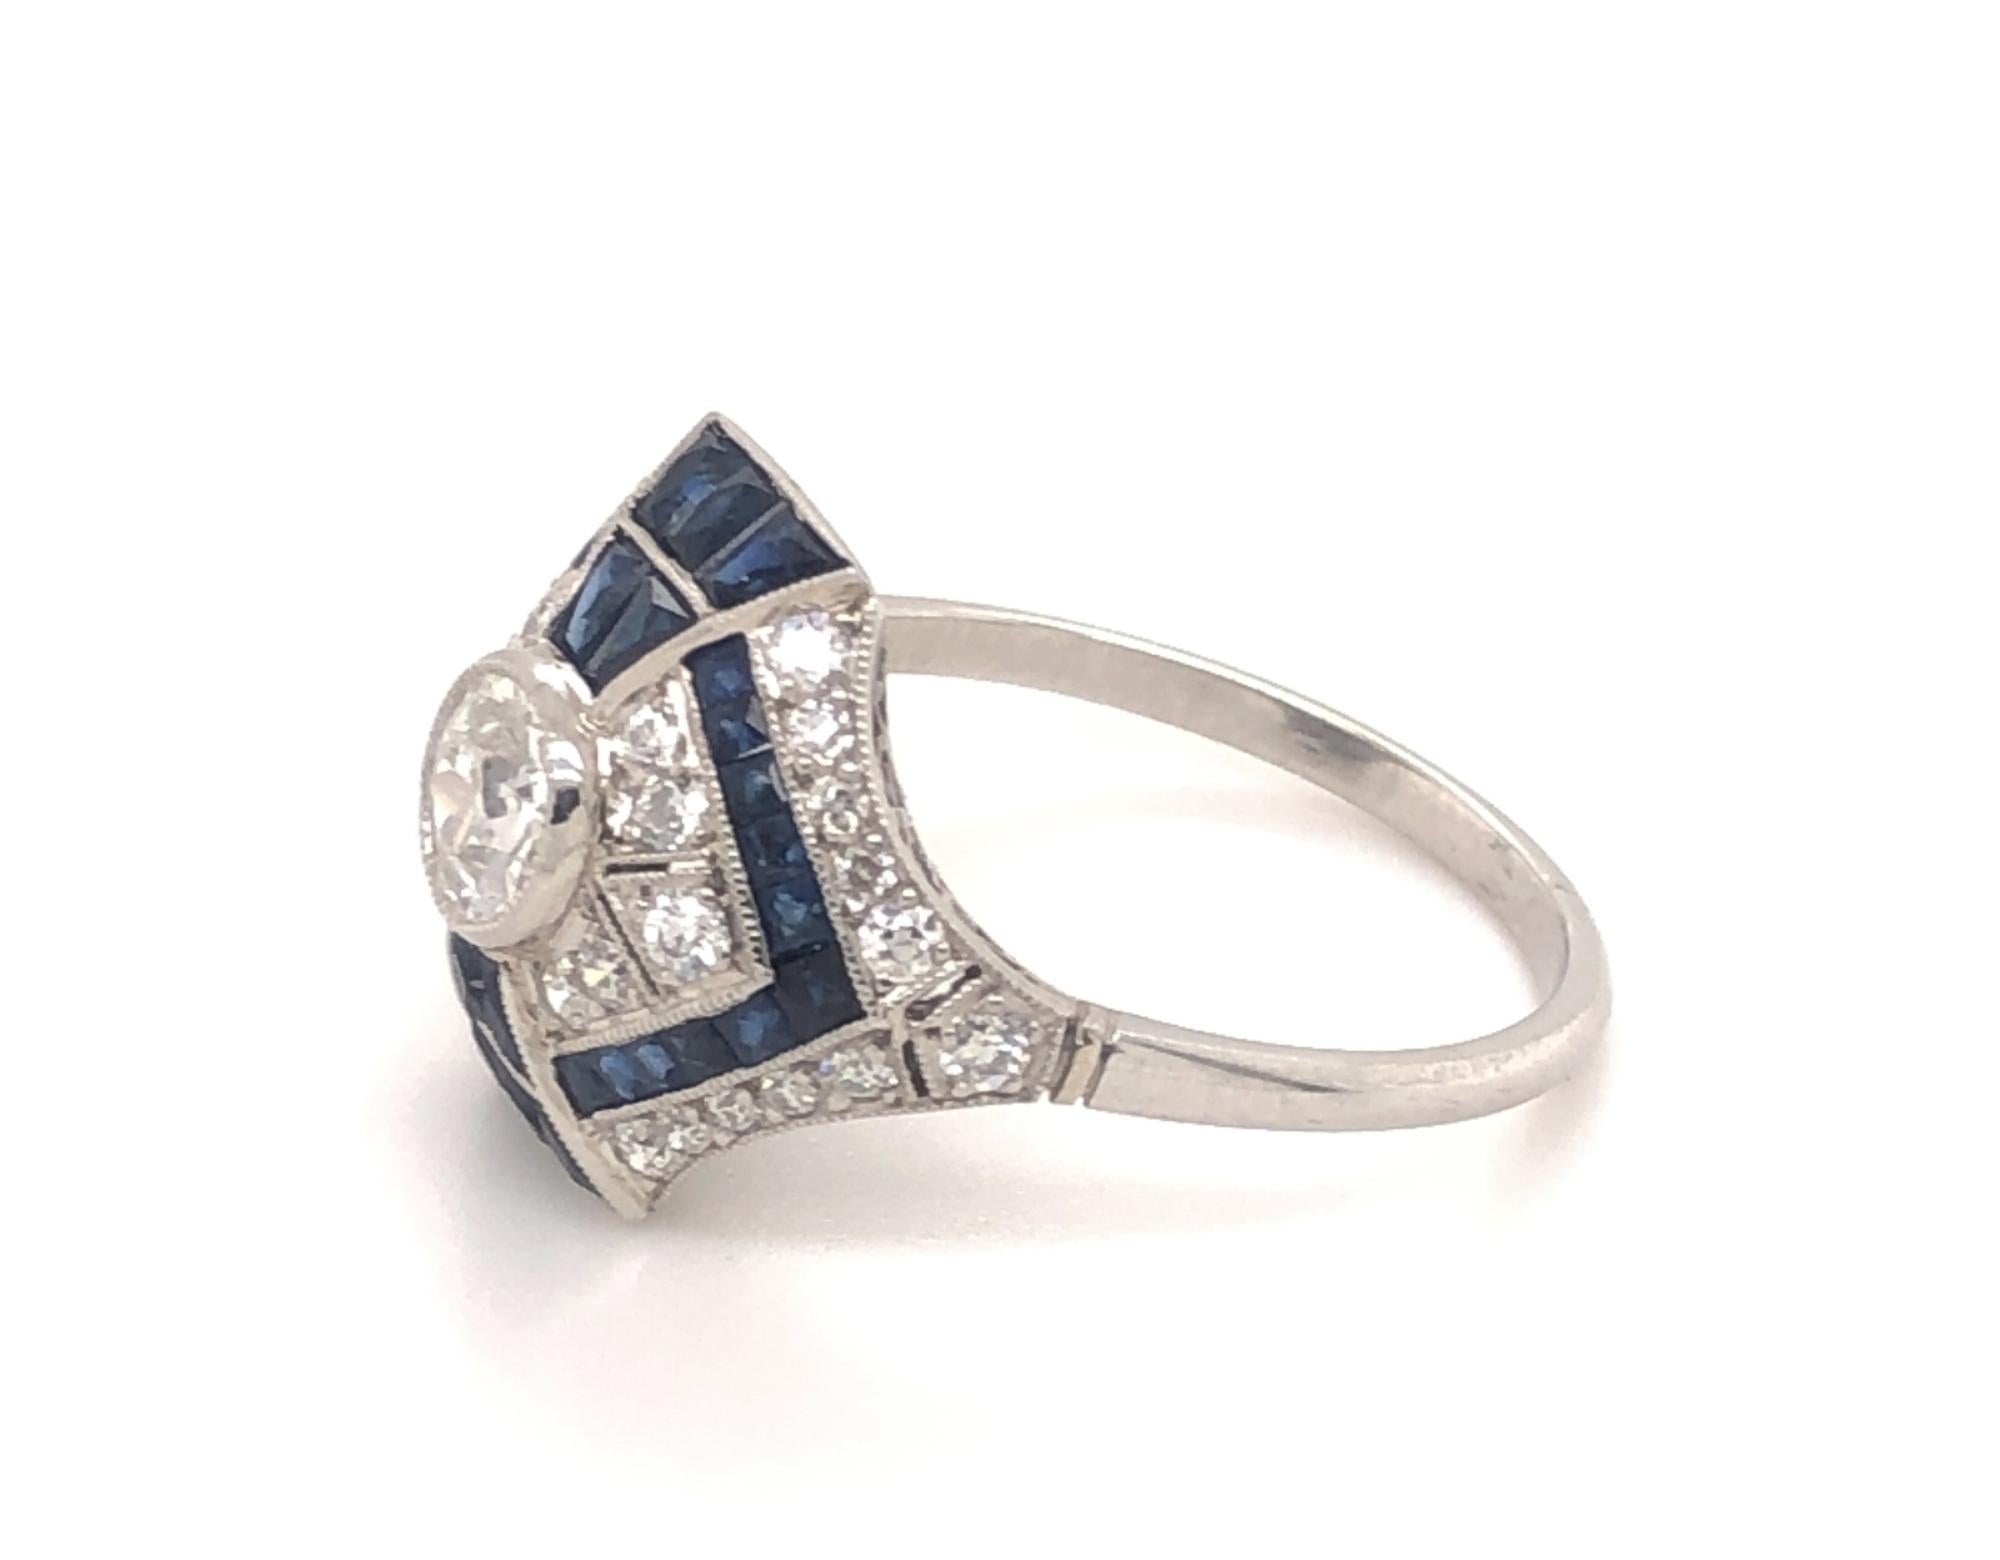 This is a beautiful art deco style ring set with an amazing setting. The ring is set with an old mine cut in the center .48 carats I Color VS-2 clarity. In addition there are 22 diamonds round diamonds I Vs-2 clarity. The 32 natural sapphires are